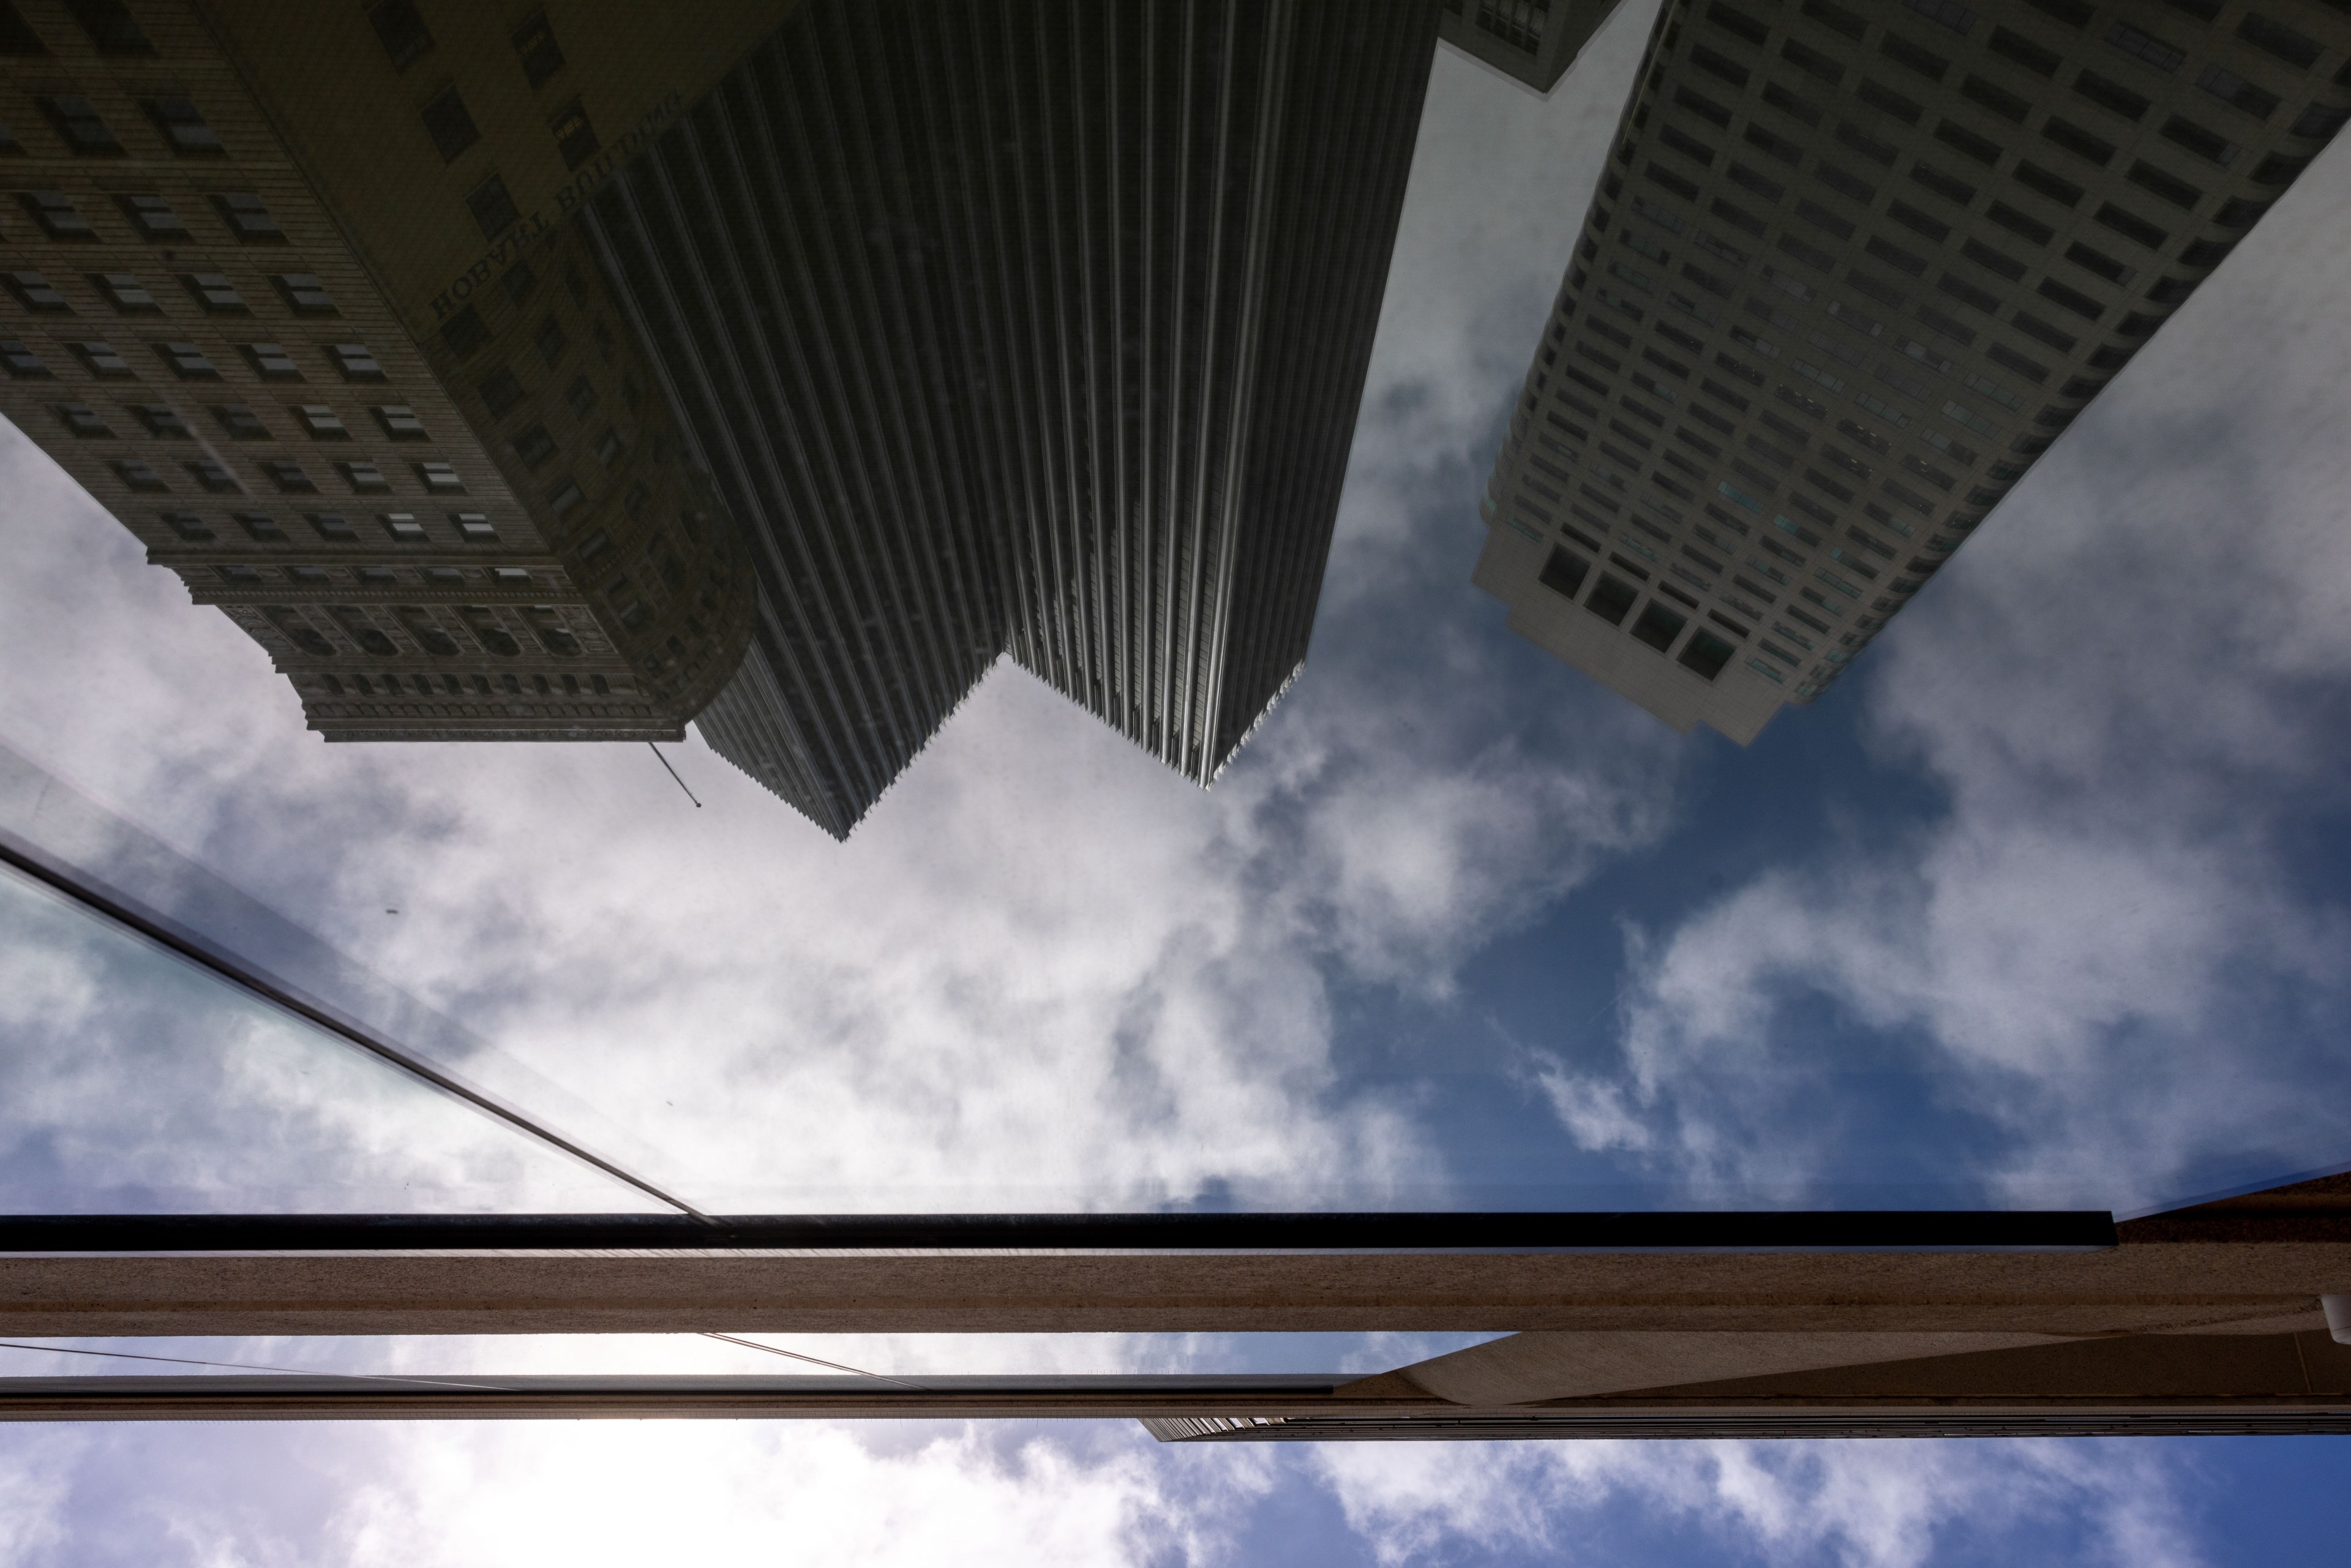 The image shows a reflection of tall buildings in a glass surface, with a partly cloudy sky and blue patches visible above.